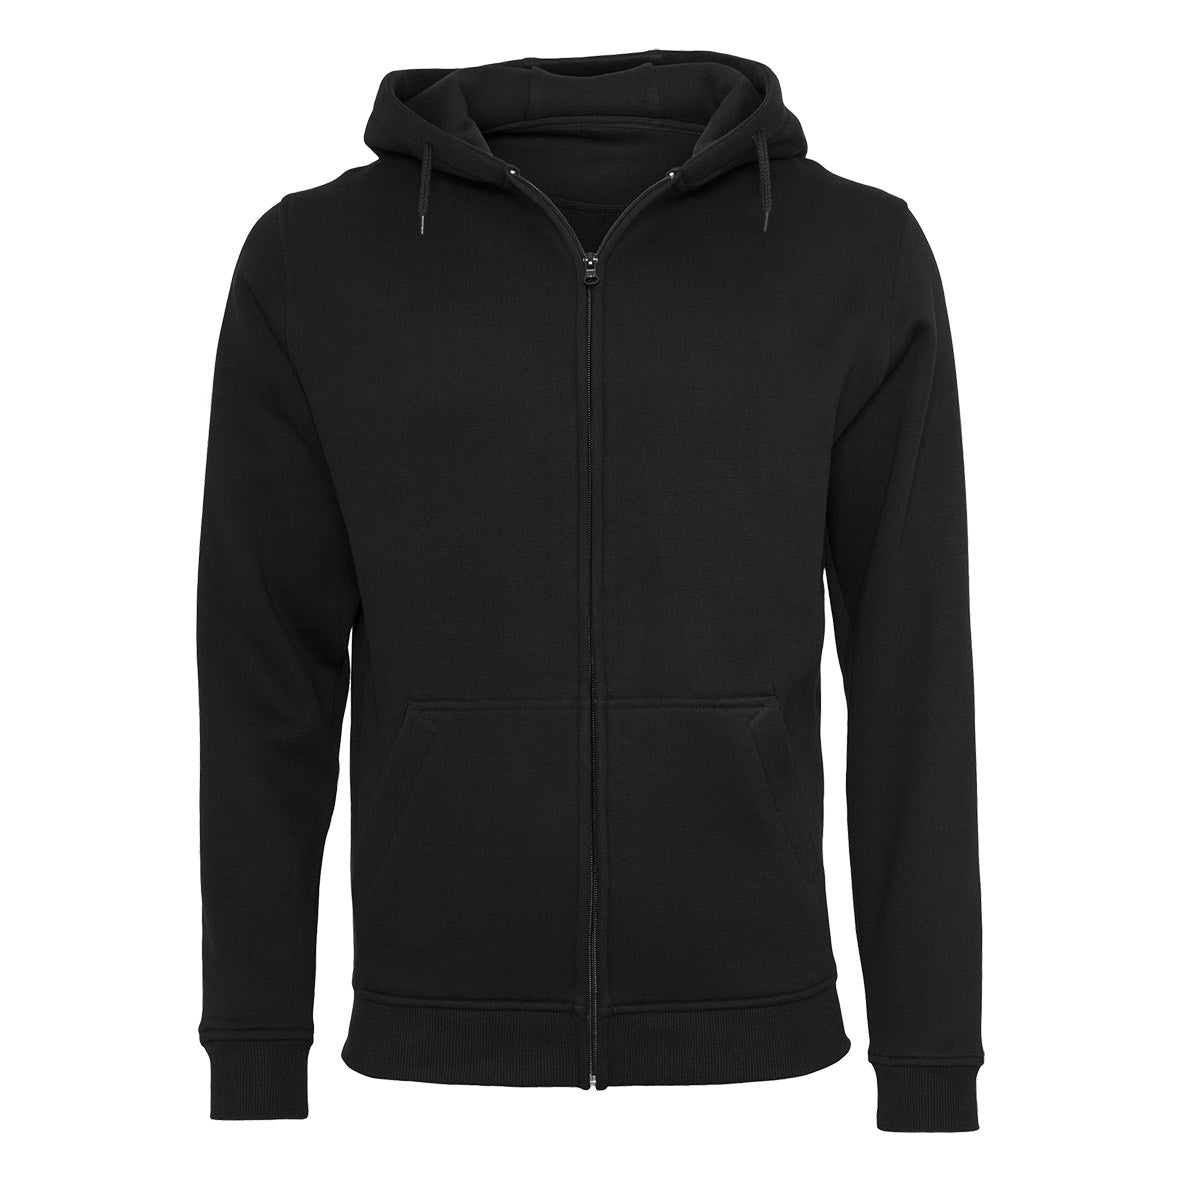 Steven Rhodes - Learn about Division - Zip-Hoodie